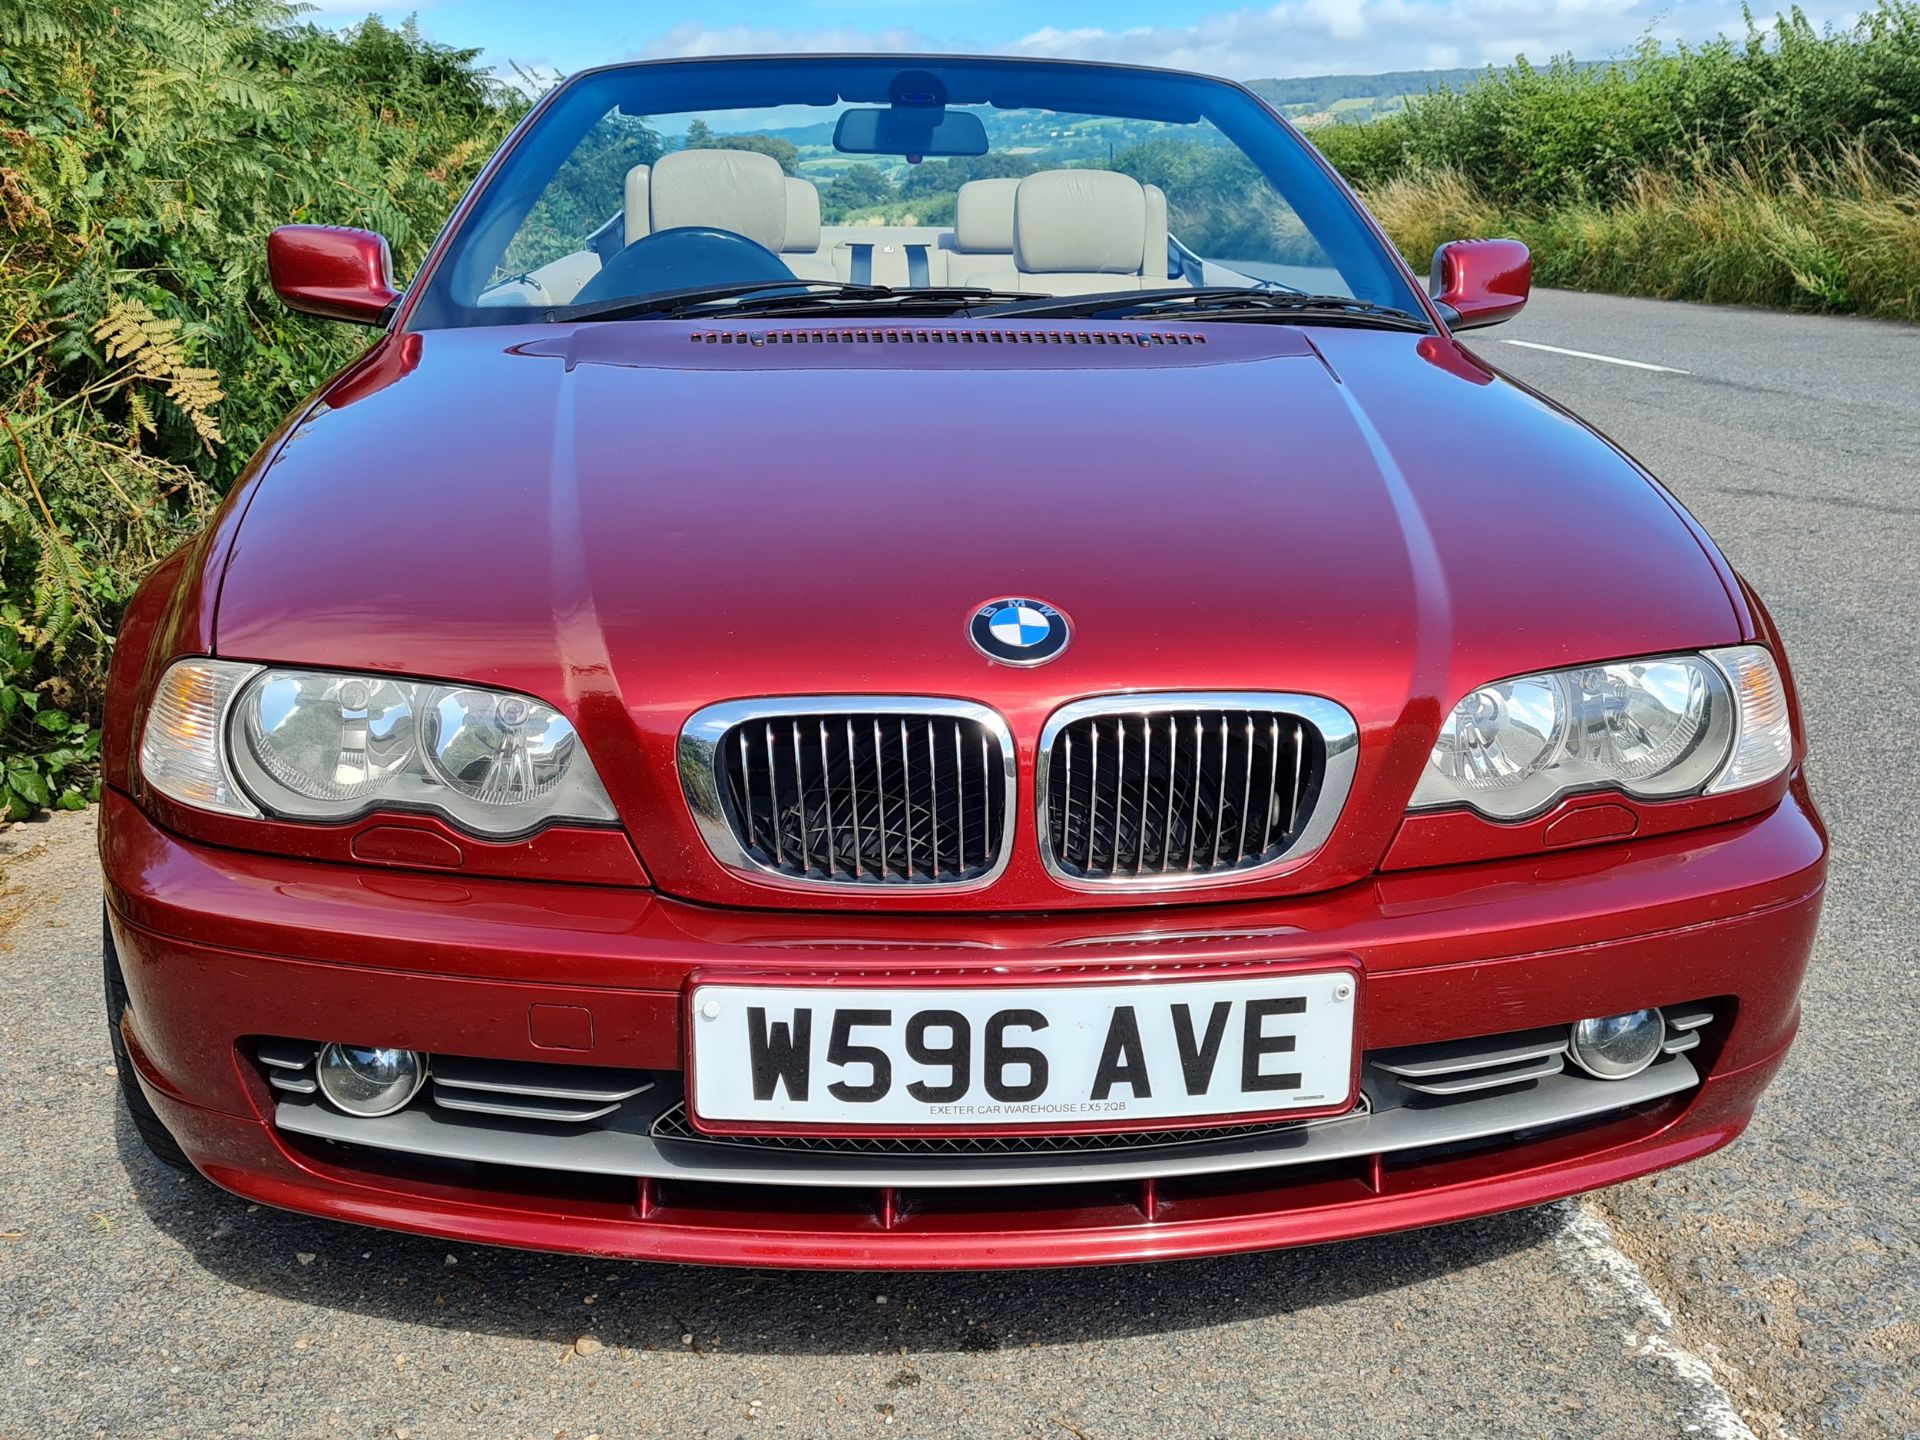 2000 BMW 330Ci Convertible Registration number W596 AVE Chassis number WBABS52060EH92204 Engine - Image 6 of 16